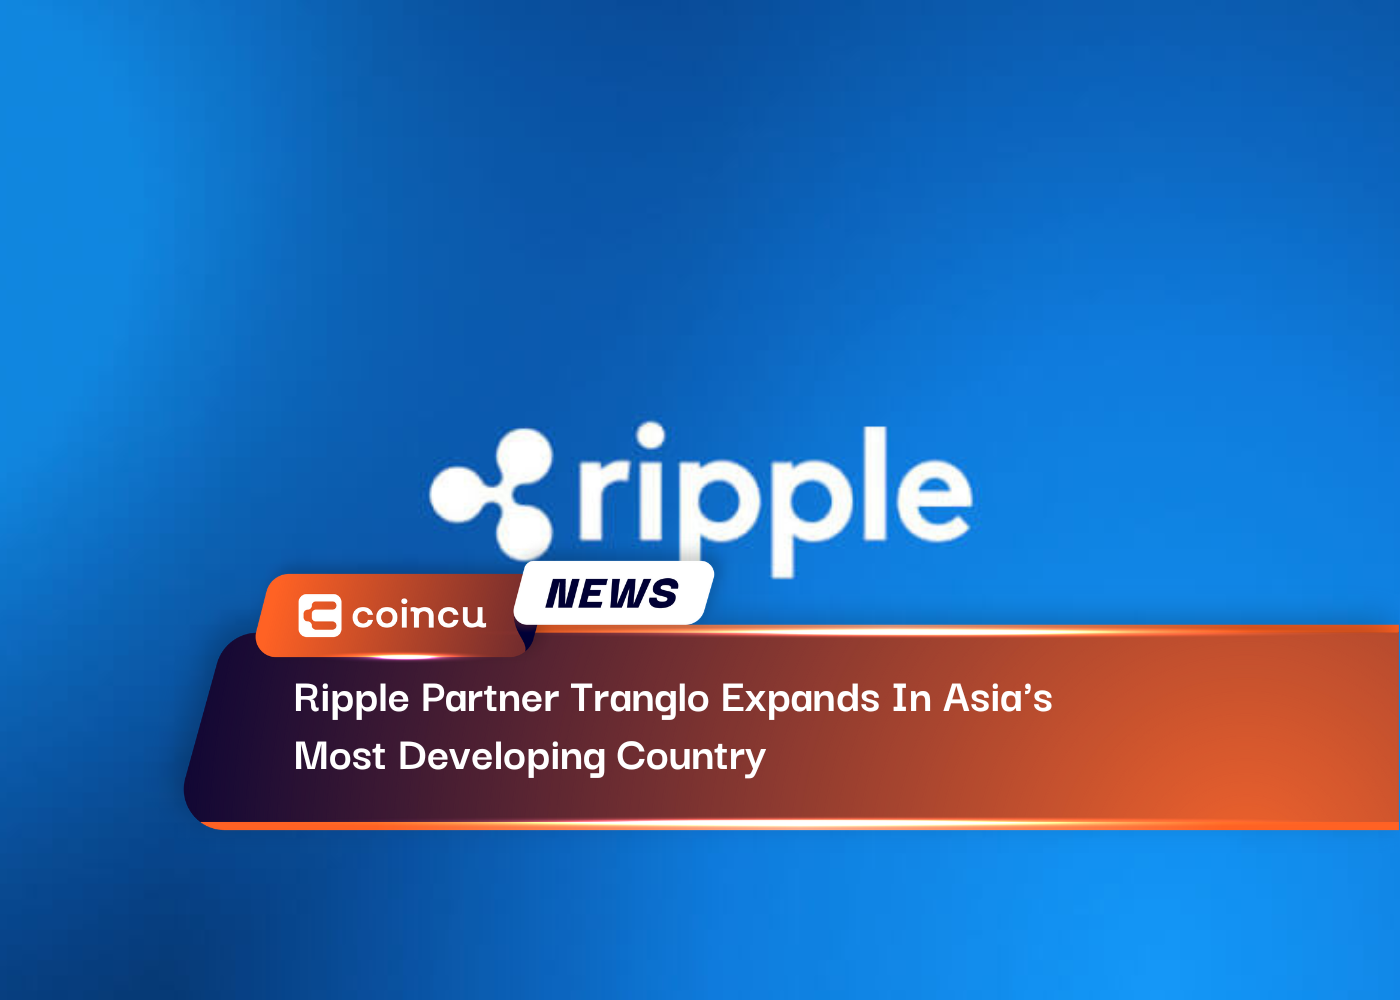 Ripple Partner Tranglo Expands In Asias